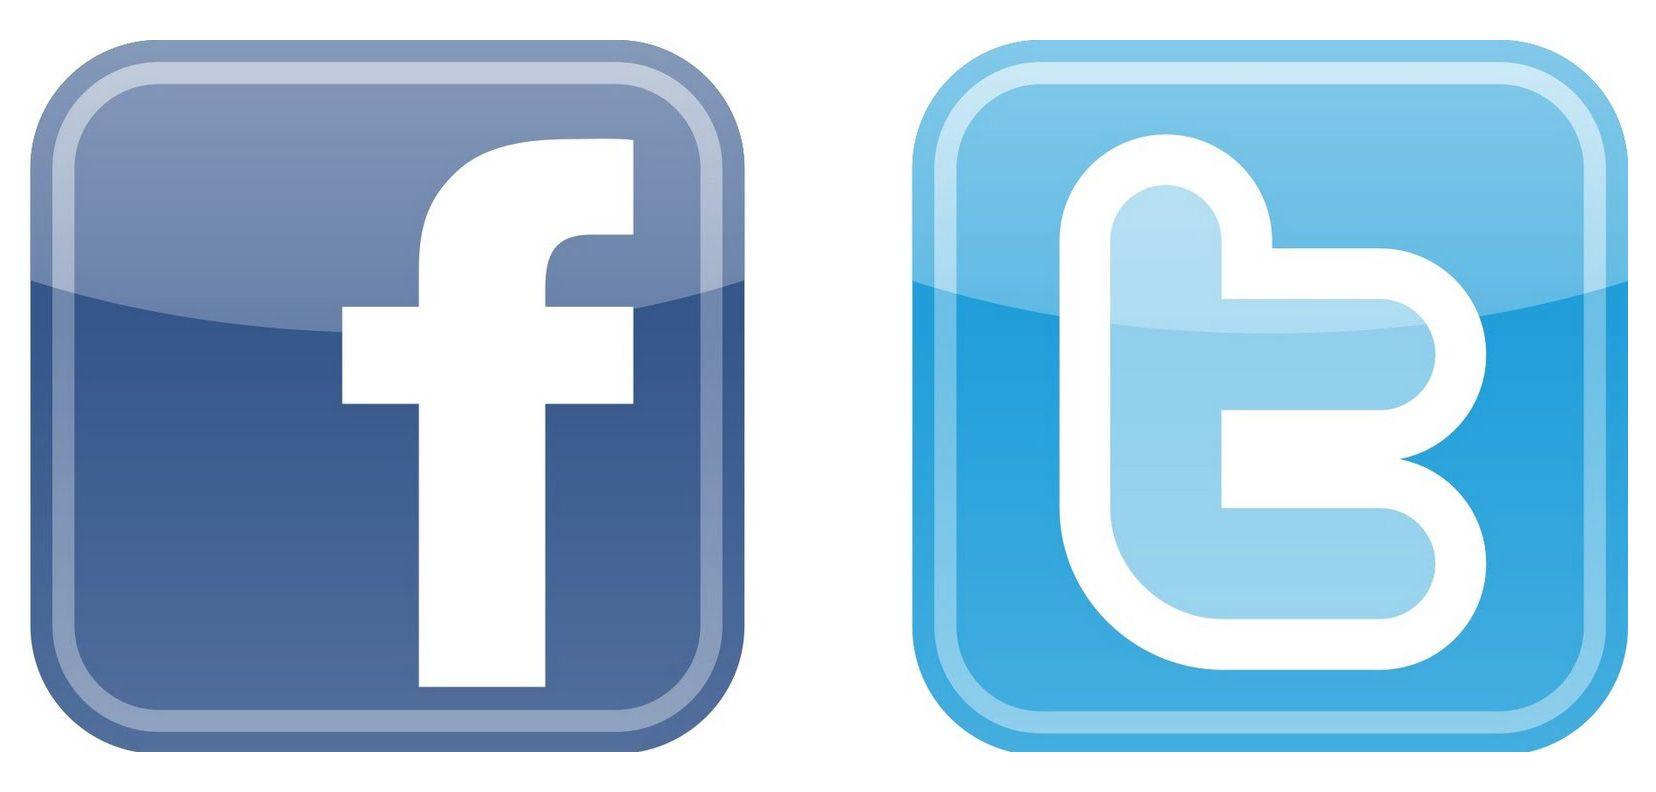 Official Small Facebook Logo - Free Small Fb Icon 41629 | Download Small Fb Icon - 41629